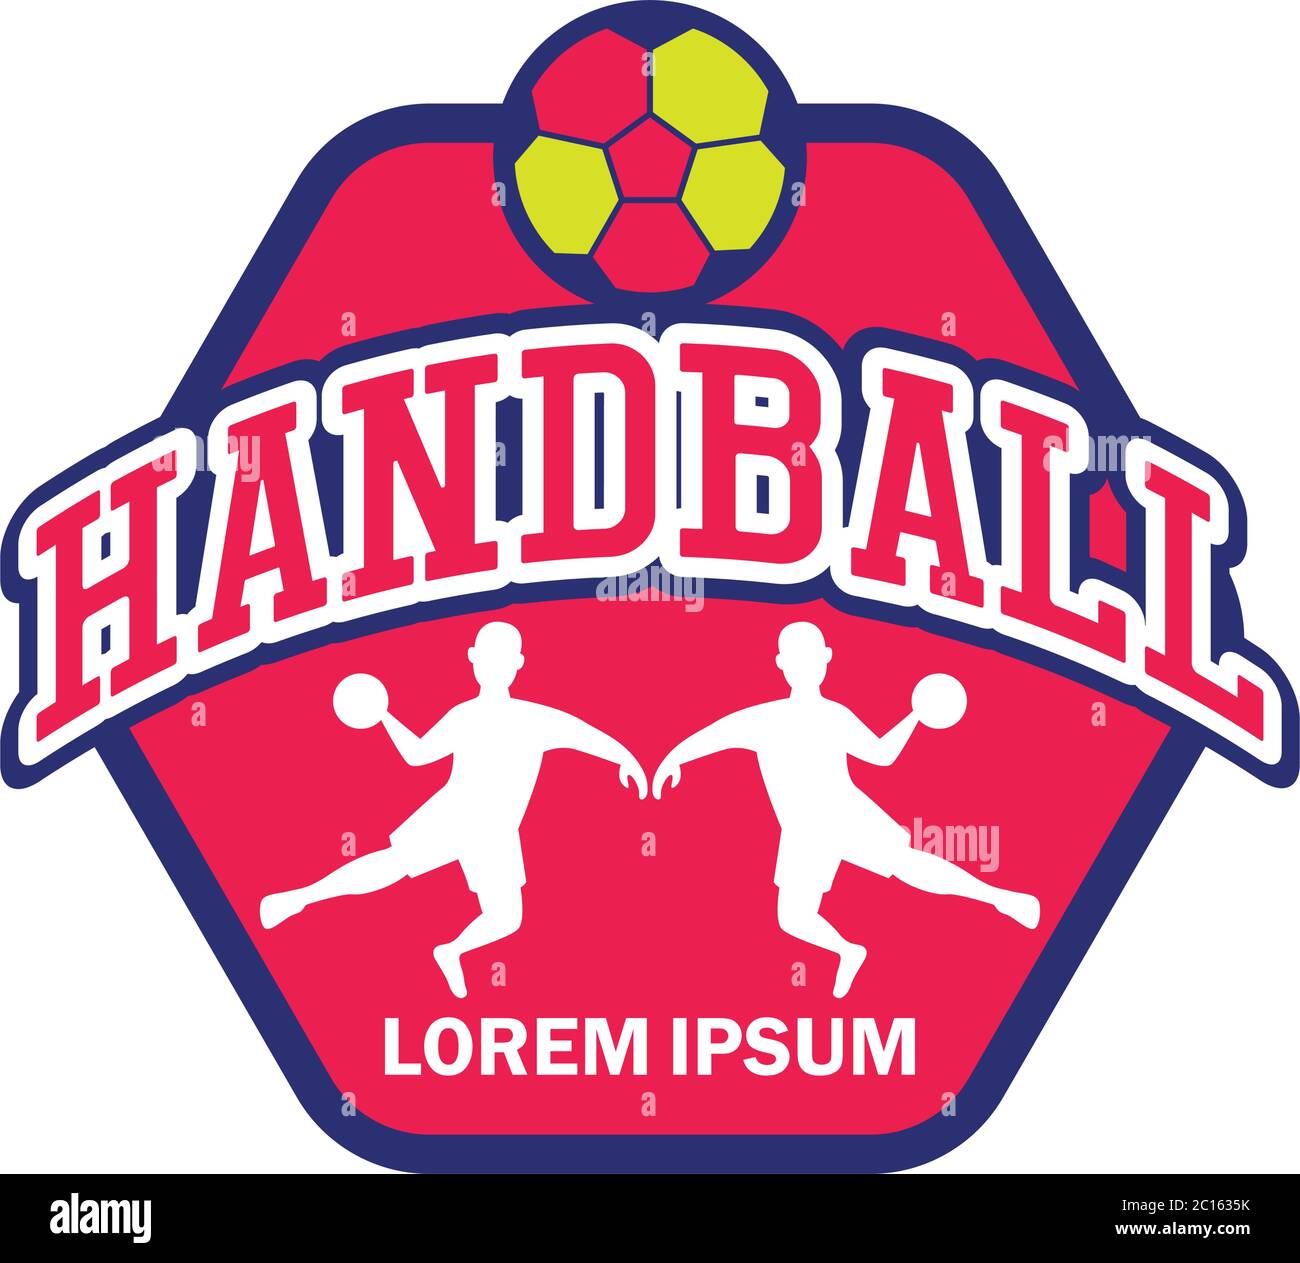 handball logo with text space for your slogan / tag line, vector illustration Stock Vector